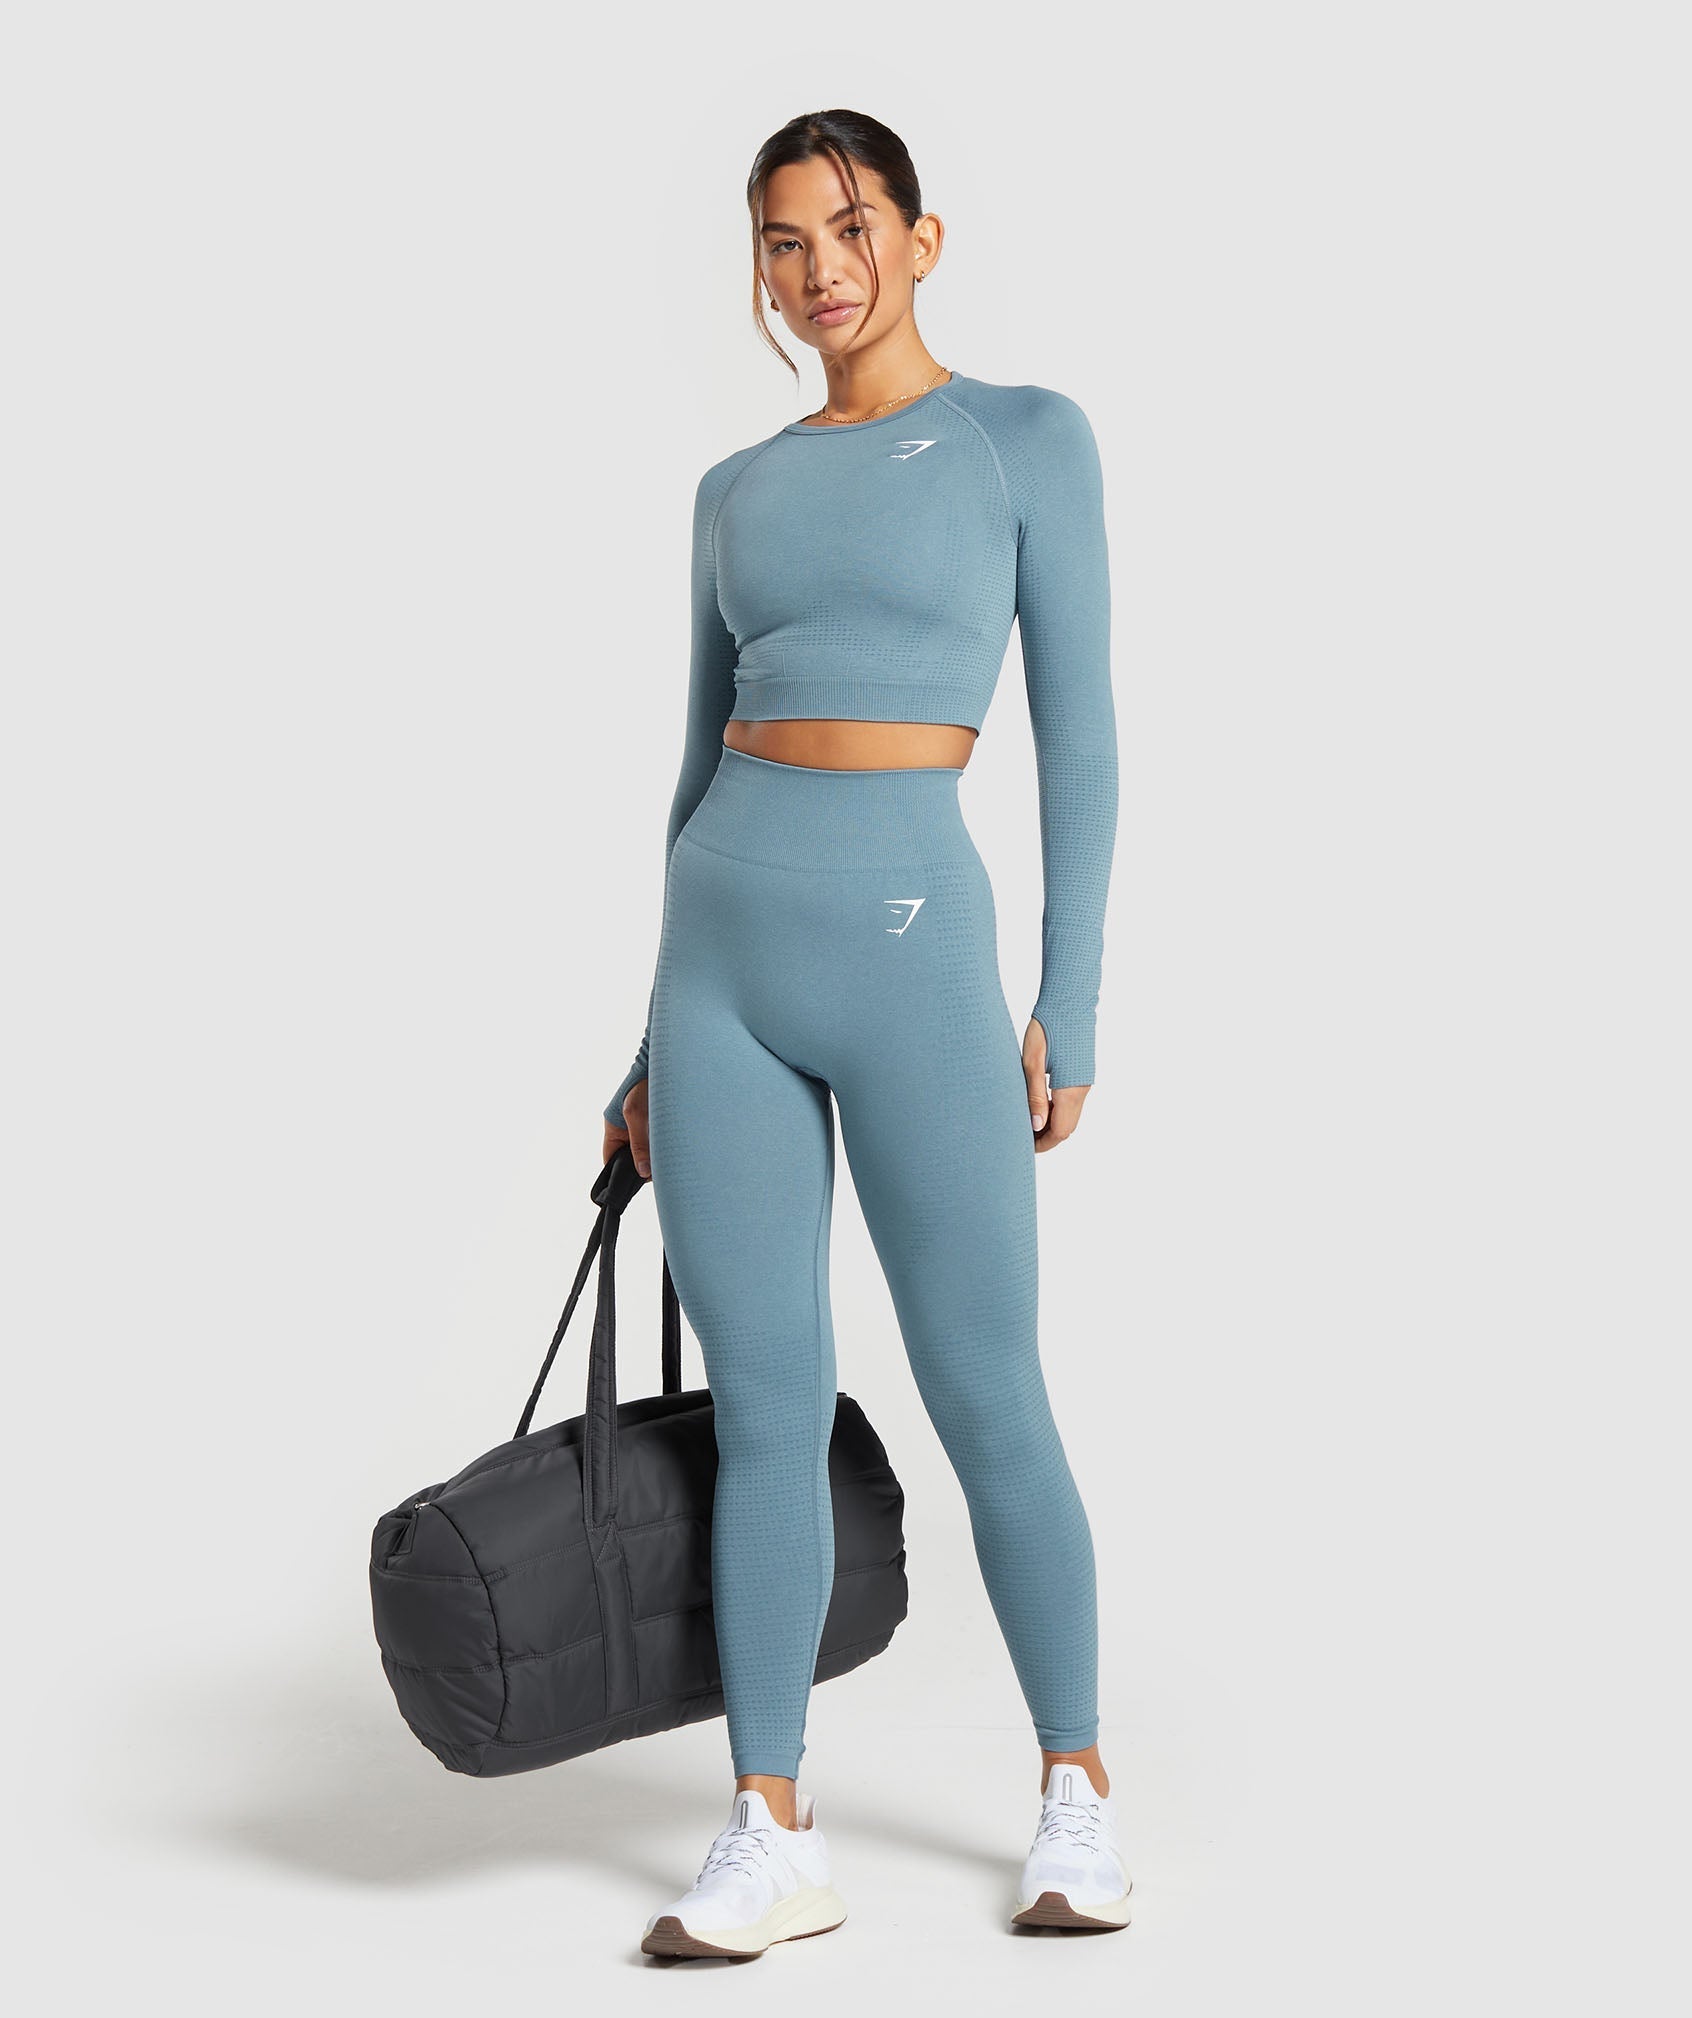 Vital Seamless 2.0 Crop Top in Faded Blue Marl - view 4